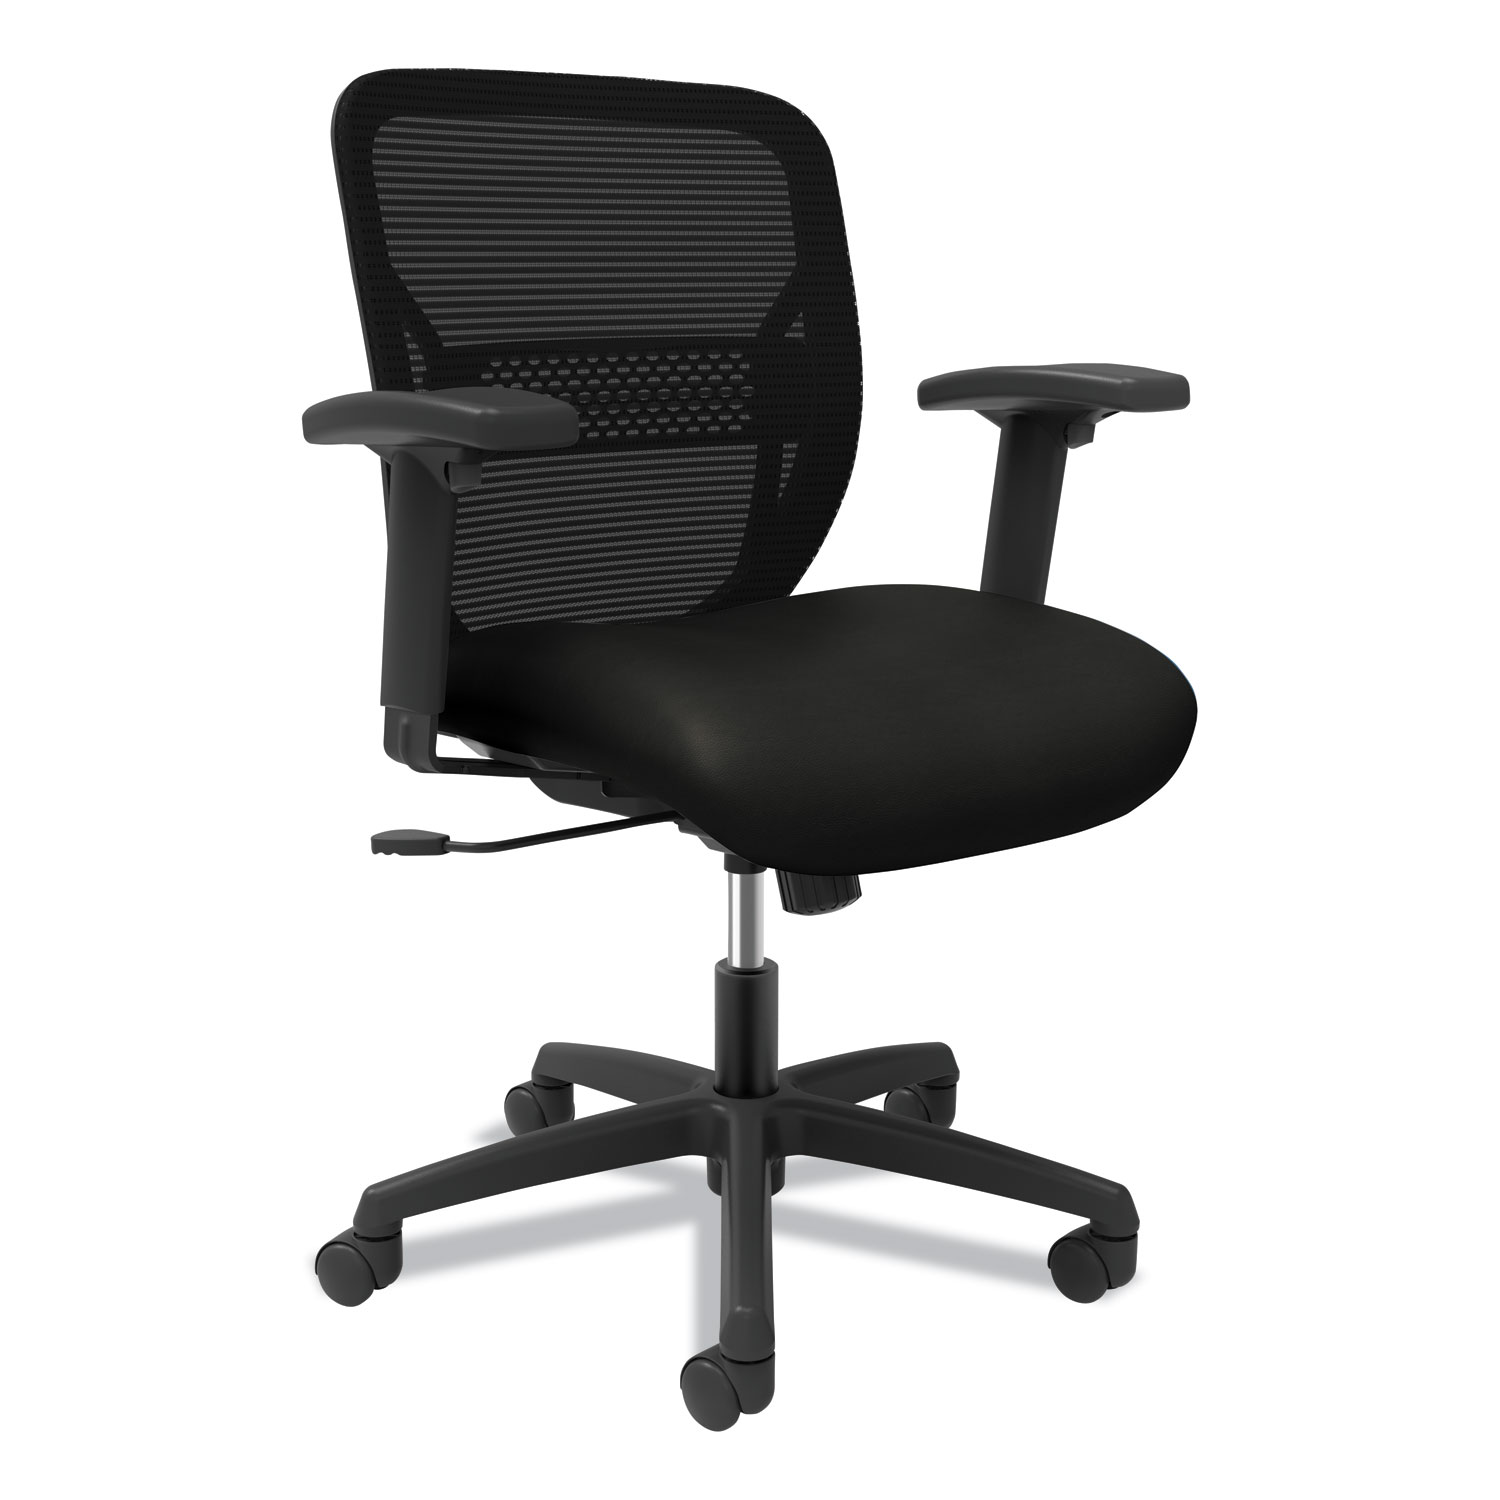  HON HONGTHMZ1UR10 Gateway Mid-Back Task Chair with Arms, Supports up to 250 lbs, Vinyl, Black Seat, Black Back, Black Base (HONGTHMZ1UR10) 